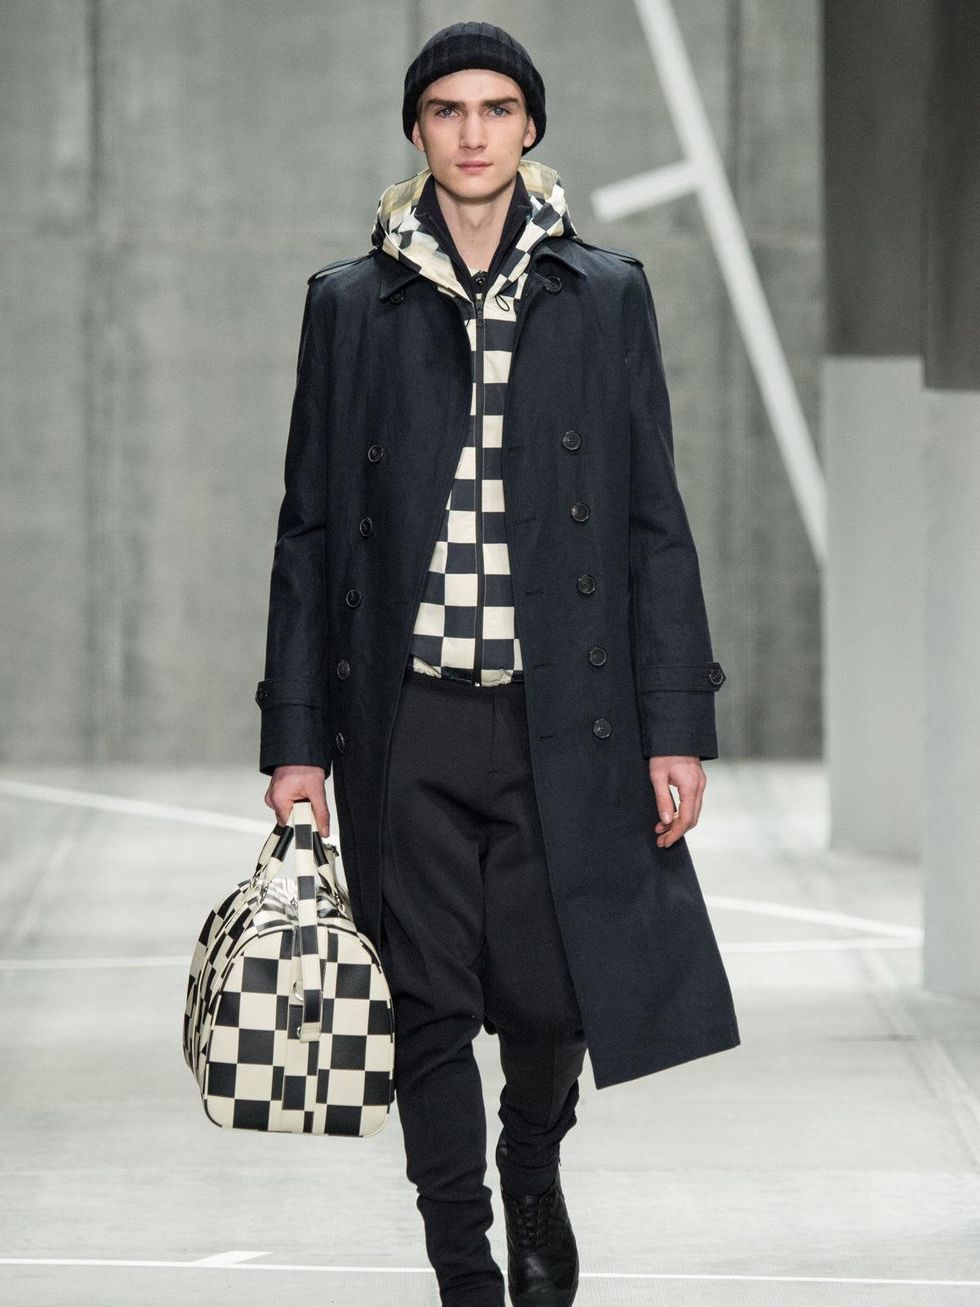 Clifford New York Fashion Week fall 2015 Lacoste April 2015 Look_034